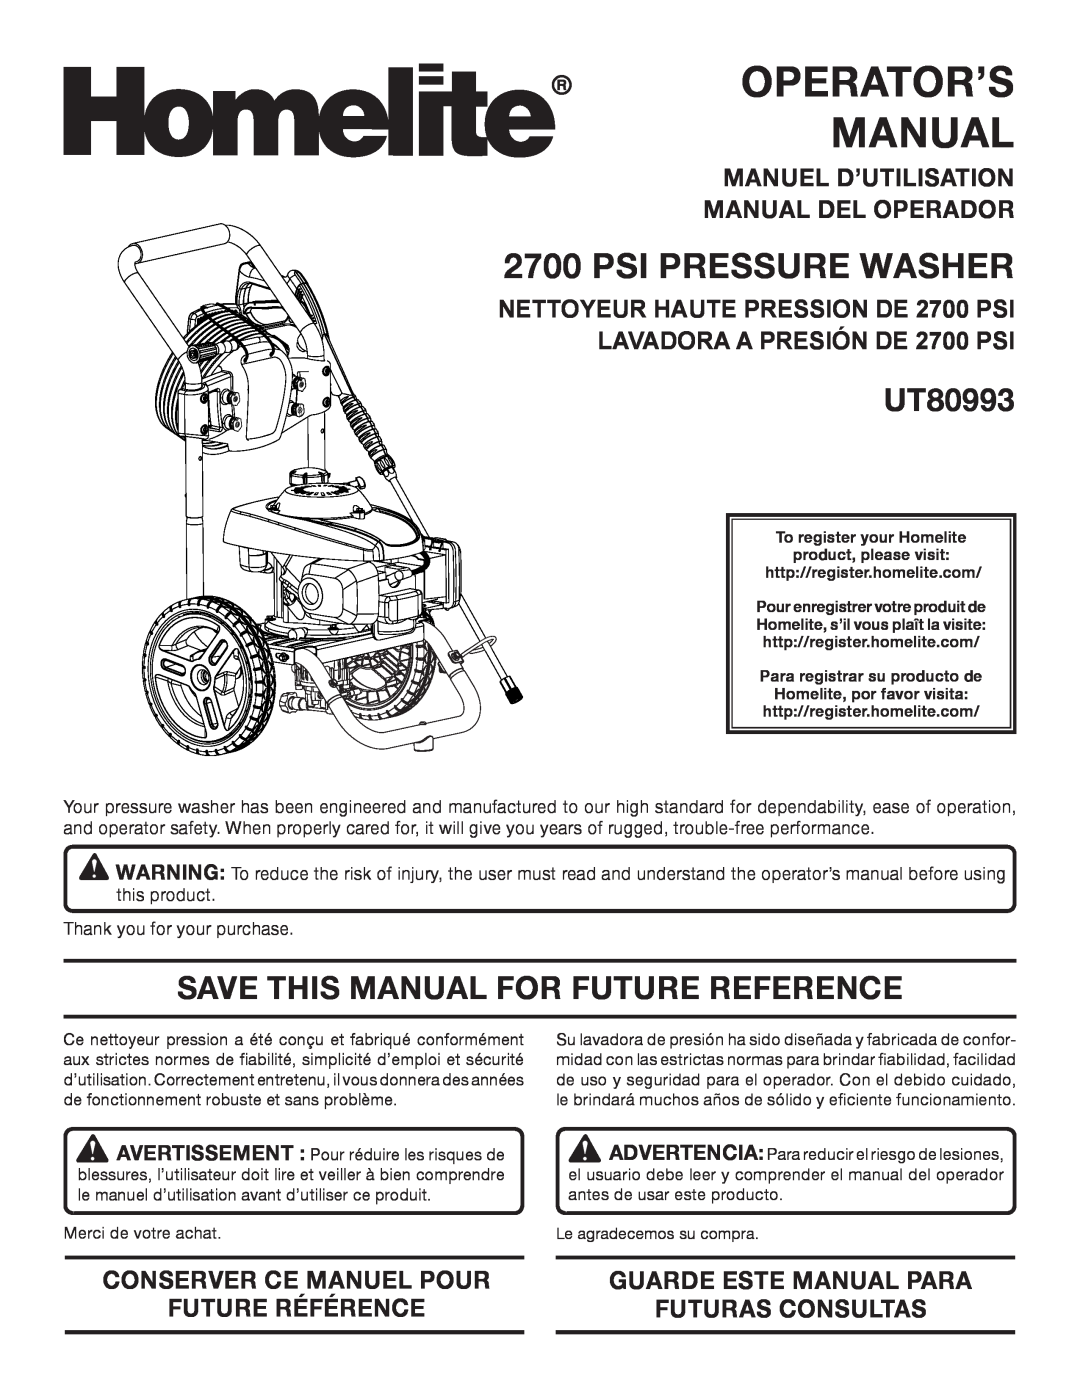 Homelite UT80993 manuel dutilisation Operator’S Manual, Save This Manual For Future Reference, Conserver Ce Manuel Pour 